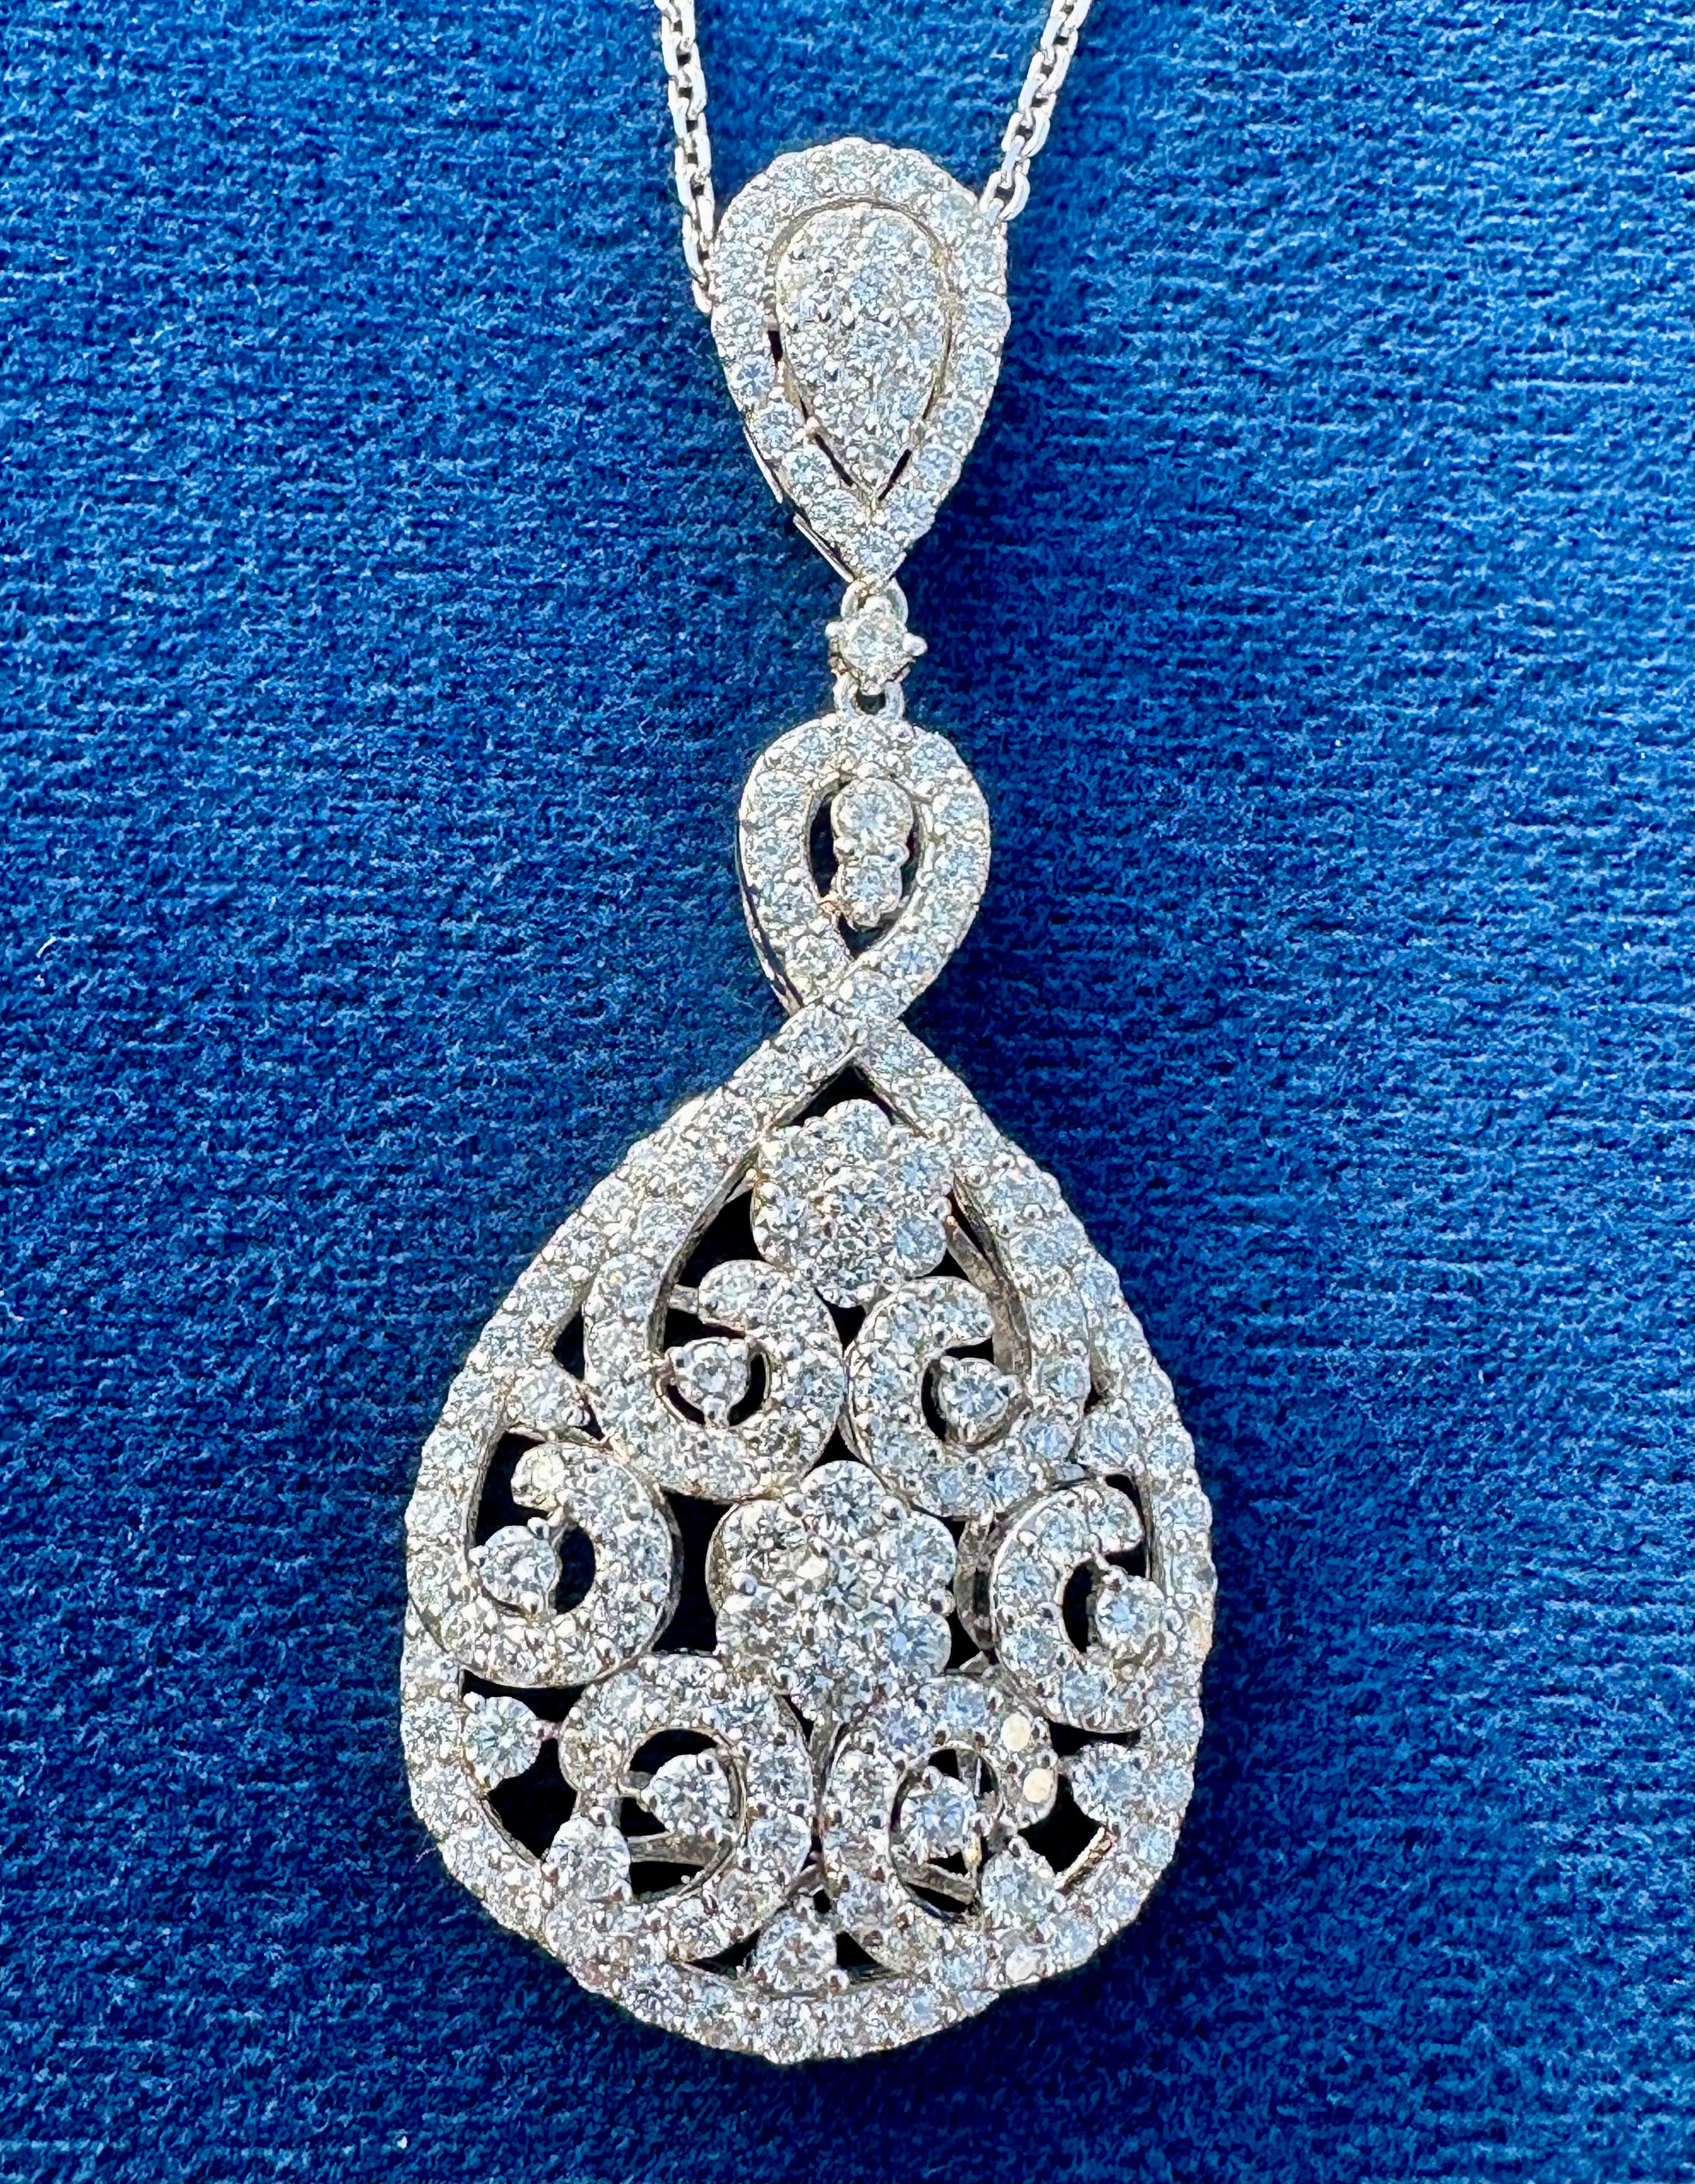 Very elegant, ladies 18 karat white gold diamond cluster pendant features a slightly domed center with an array of round brilliant diamonds in a pear shape. Two diamond flower motif clusters are surrounded by fancy swirling motifs cascading